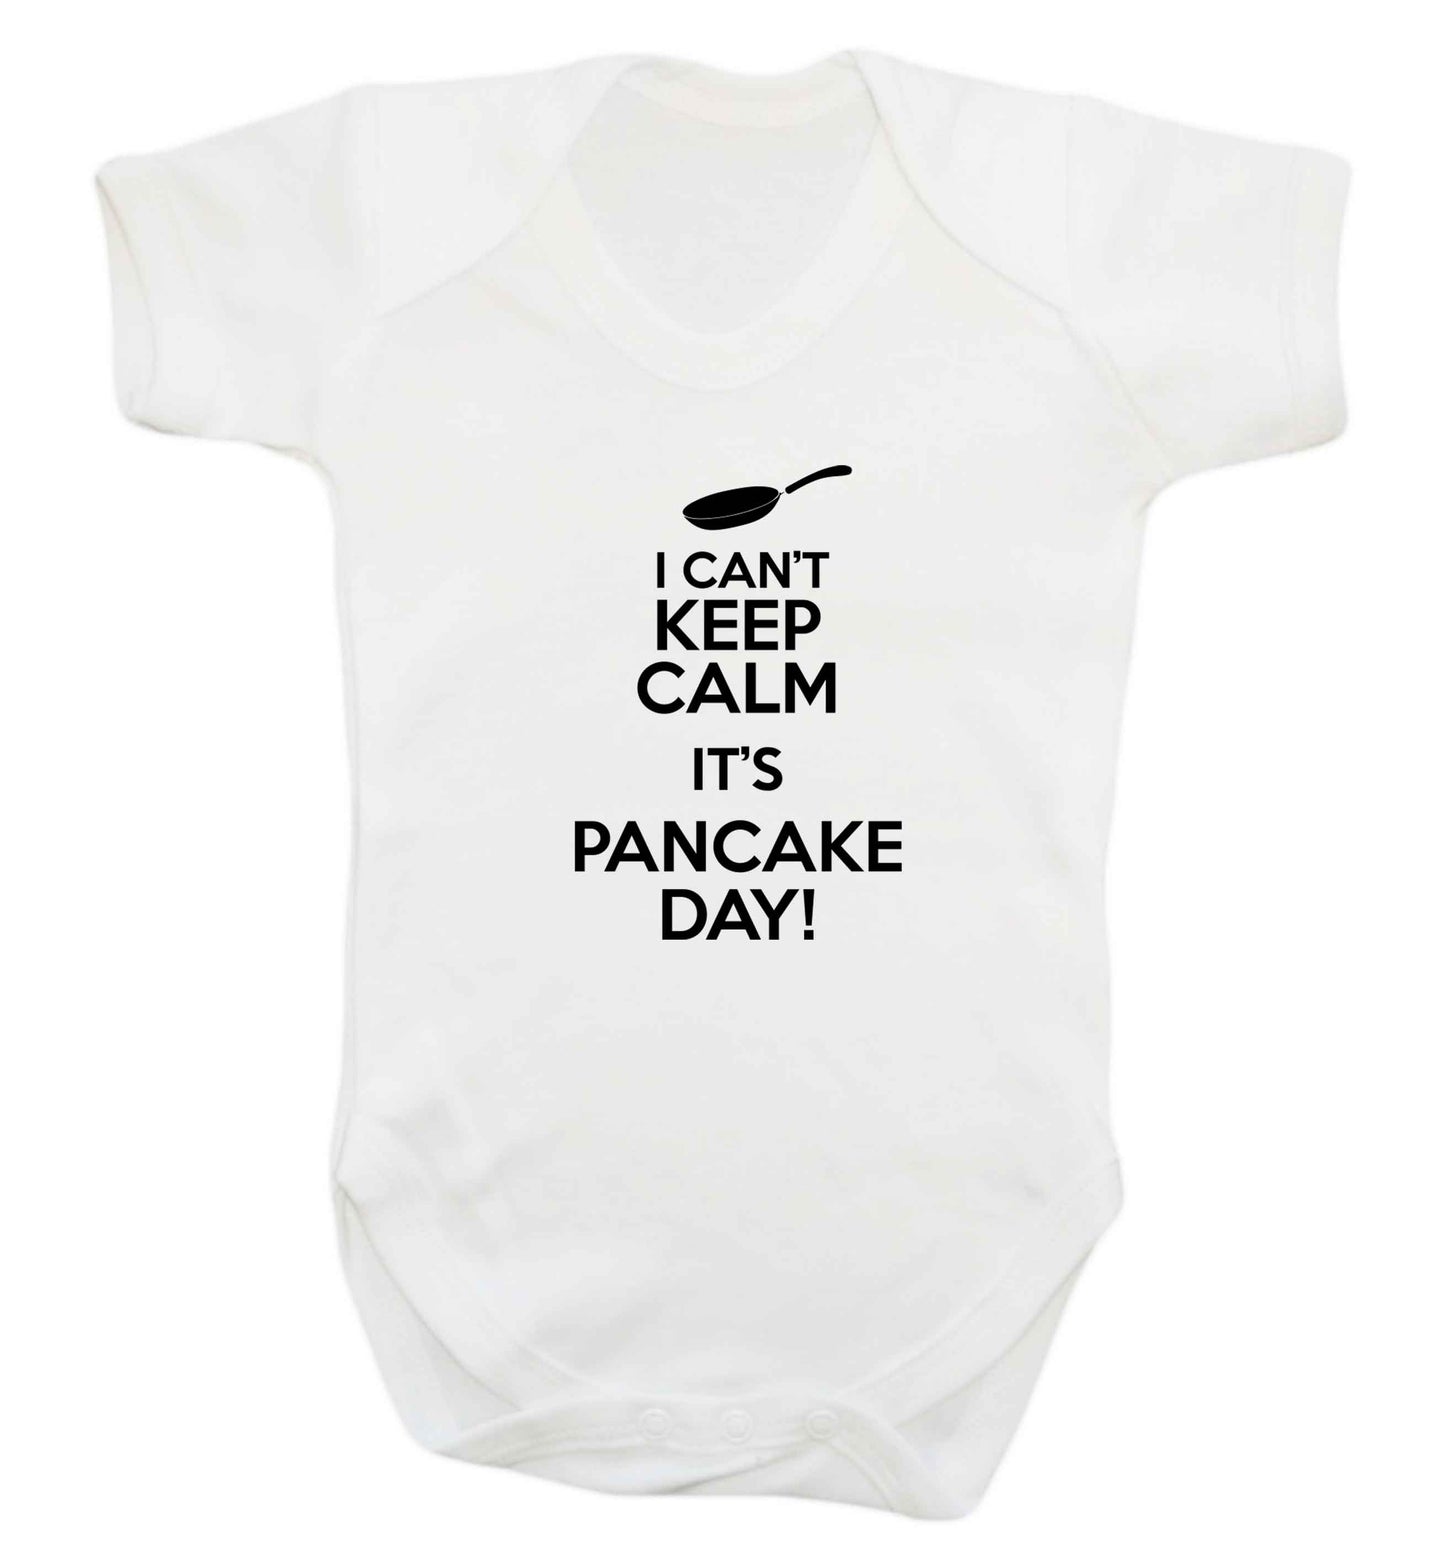 I can't keep calm it's pancake day! baby vest white 18-24 months